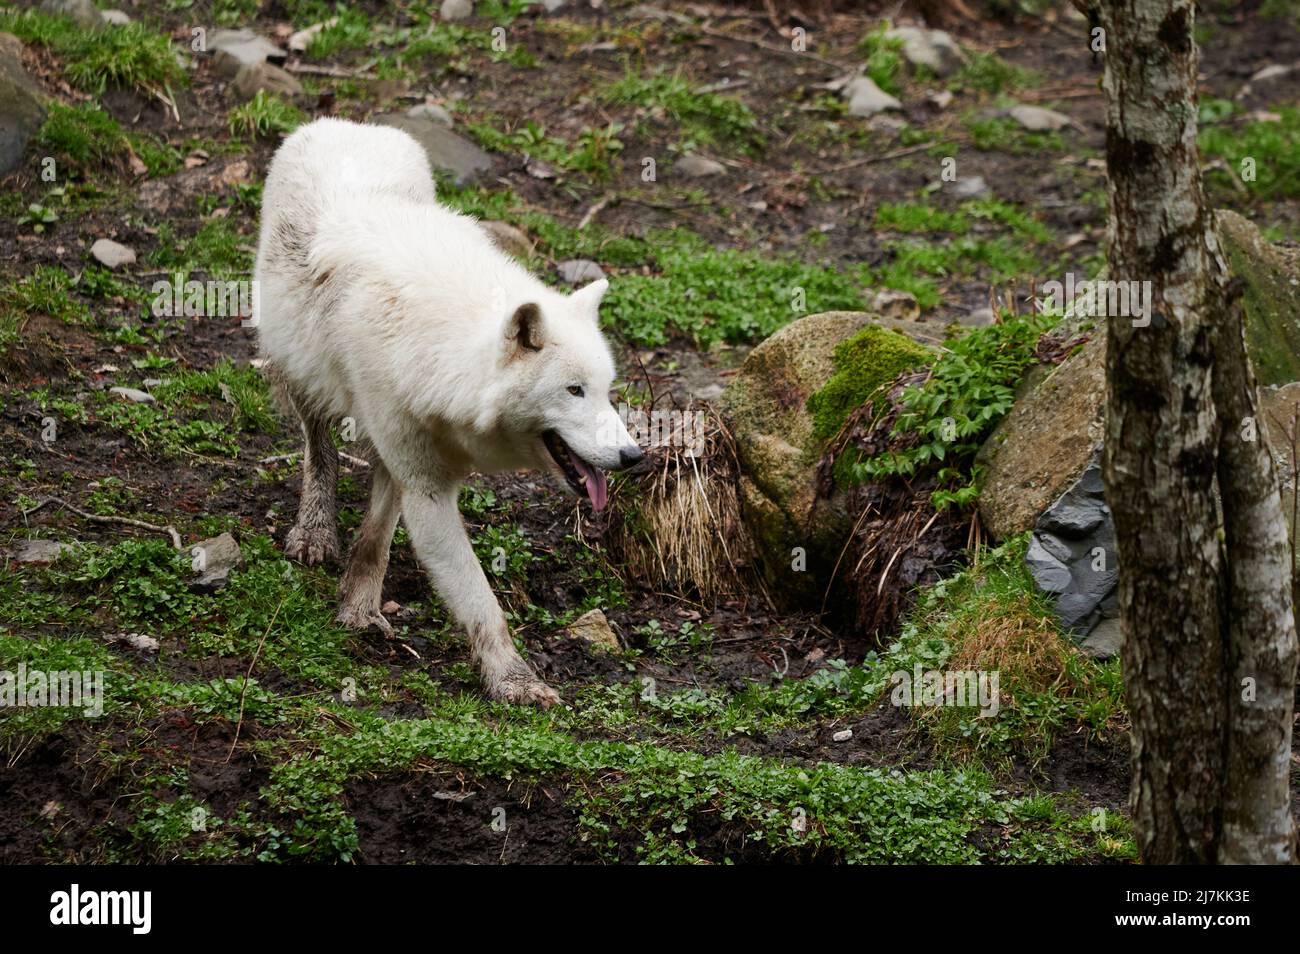 Wild Arctic wolf with white fur crawling and sniffing ground while searching for prey in daytime woodland Stock Photo